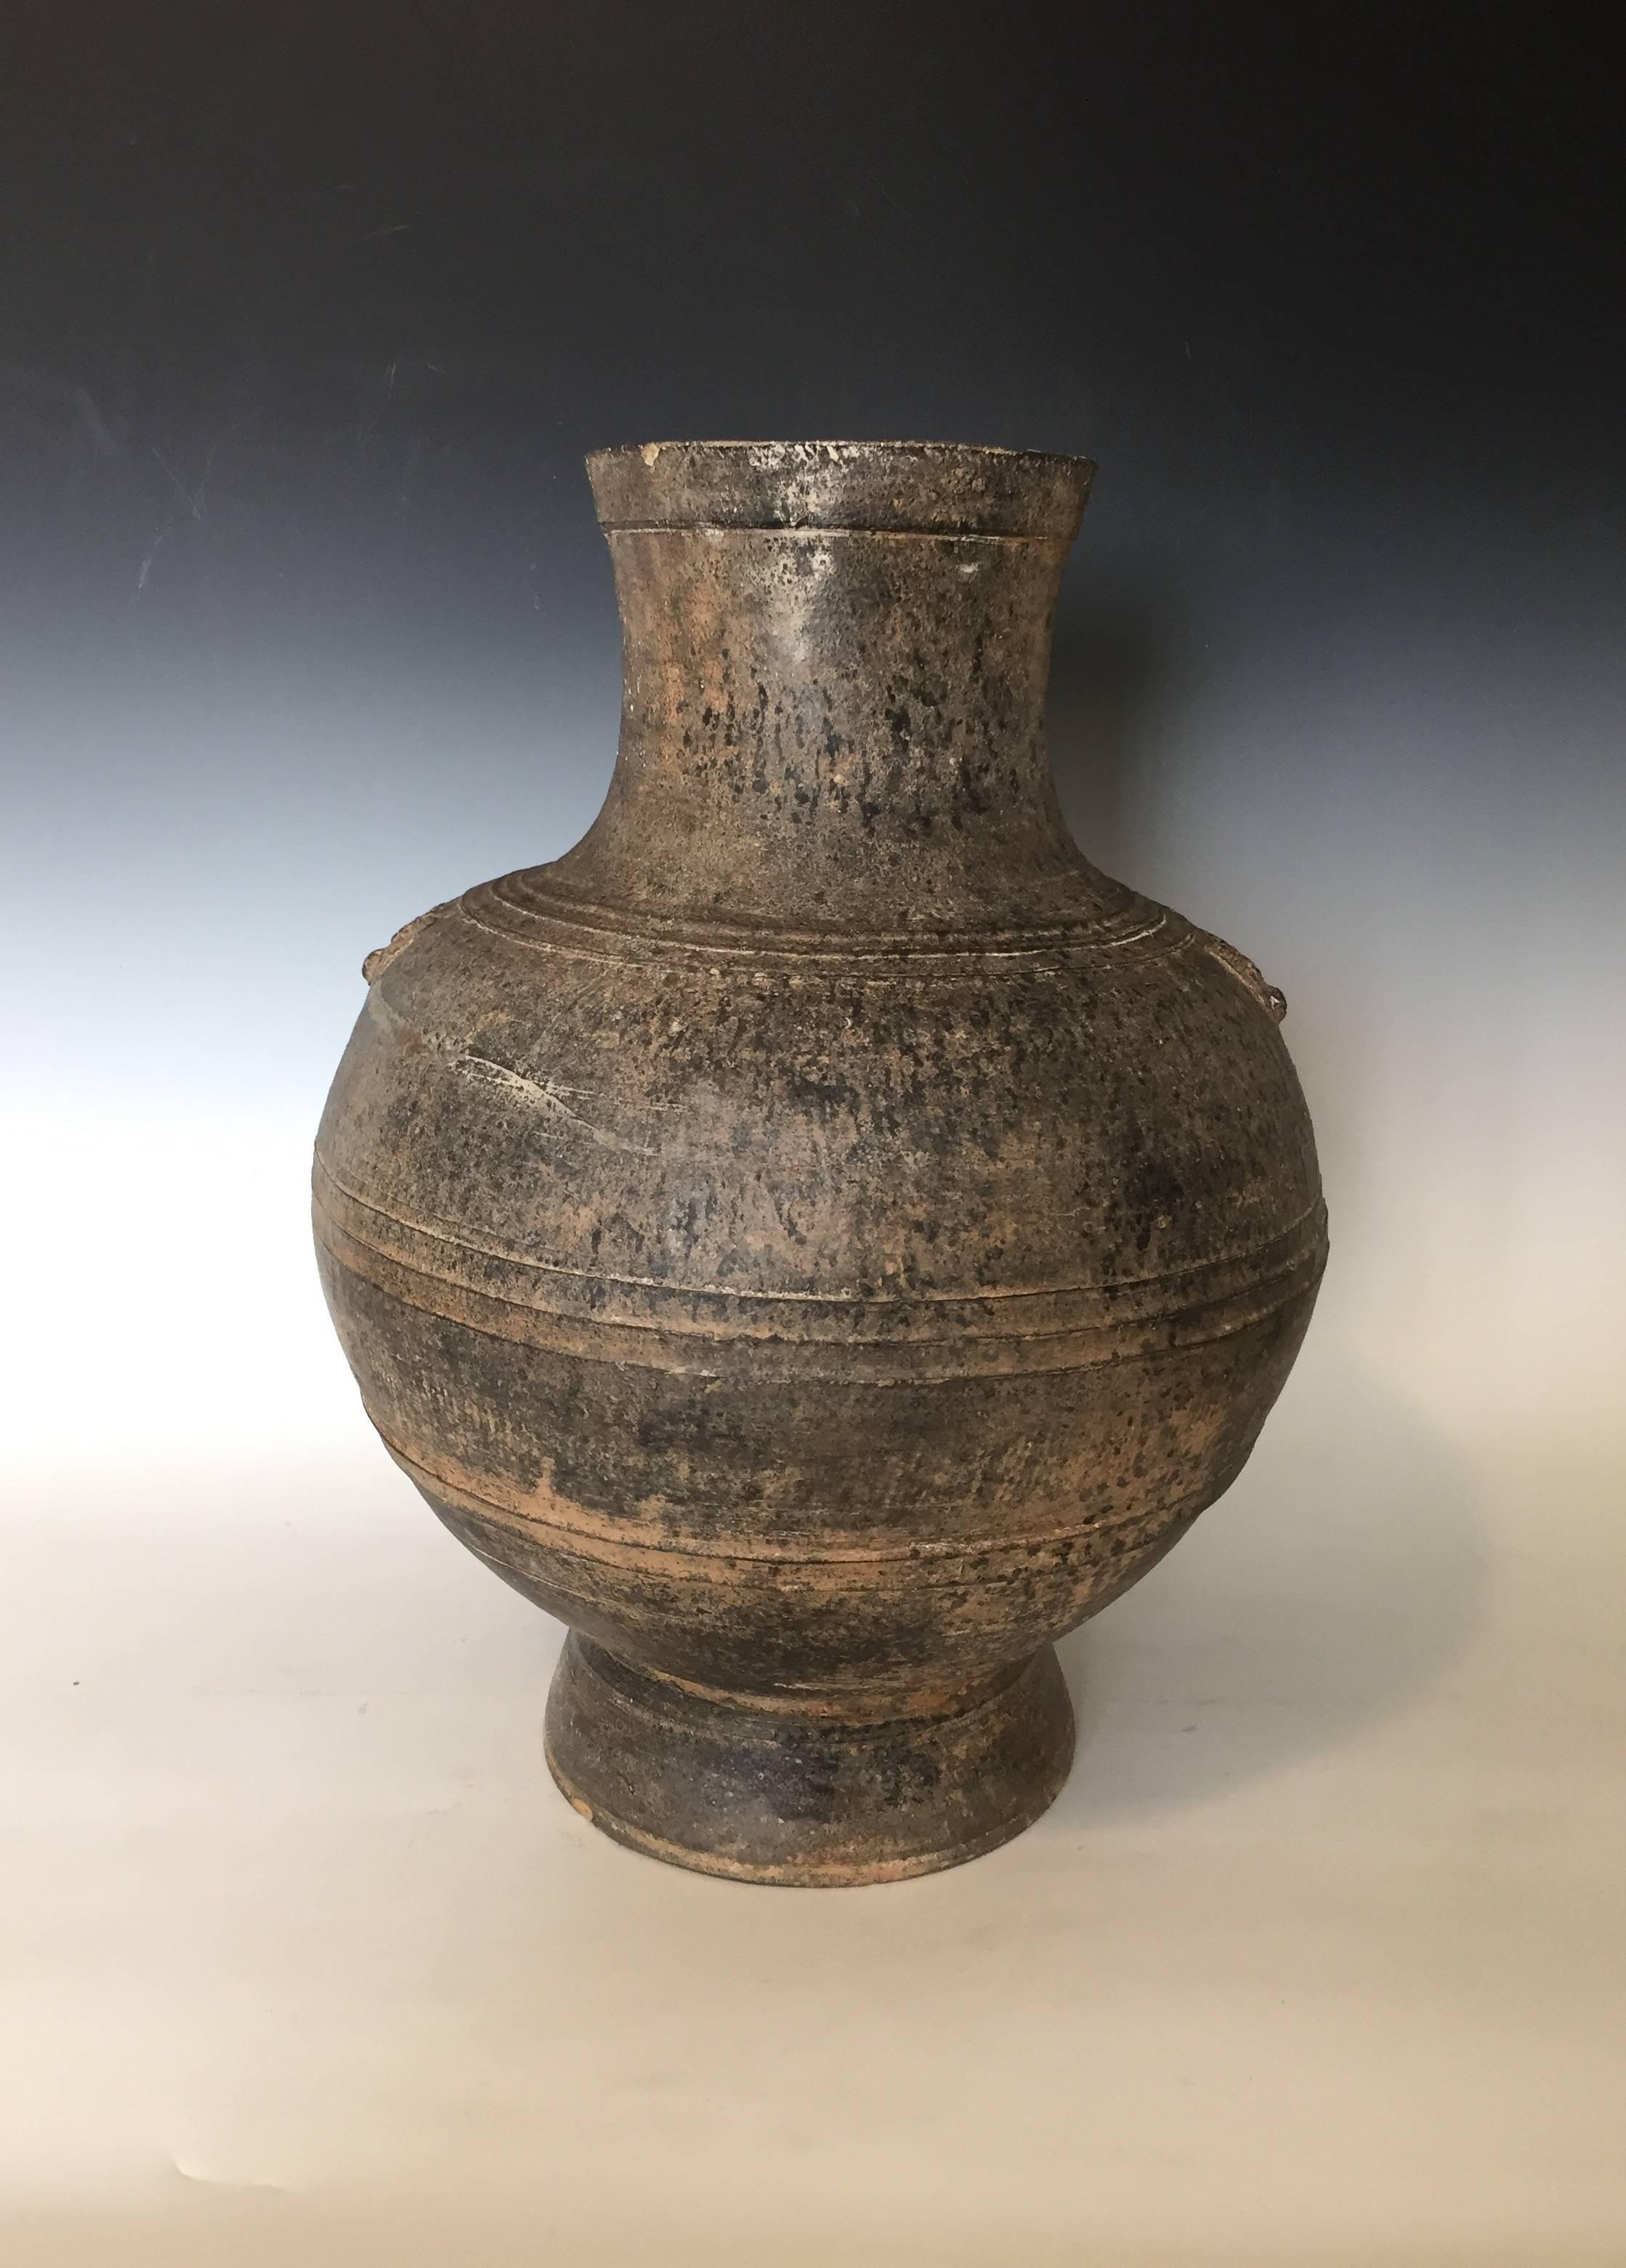 Pair of large Han dynasty Jars (206 B.C-220 A.D).
Measures: Height 20" tall x 15.5" x 15.5"
Grey pottery with beautiful patina. Each Jar has two taotie masks that adorn each side.